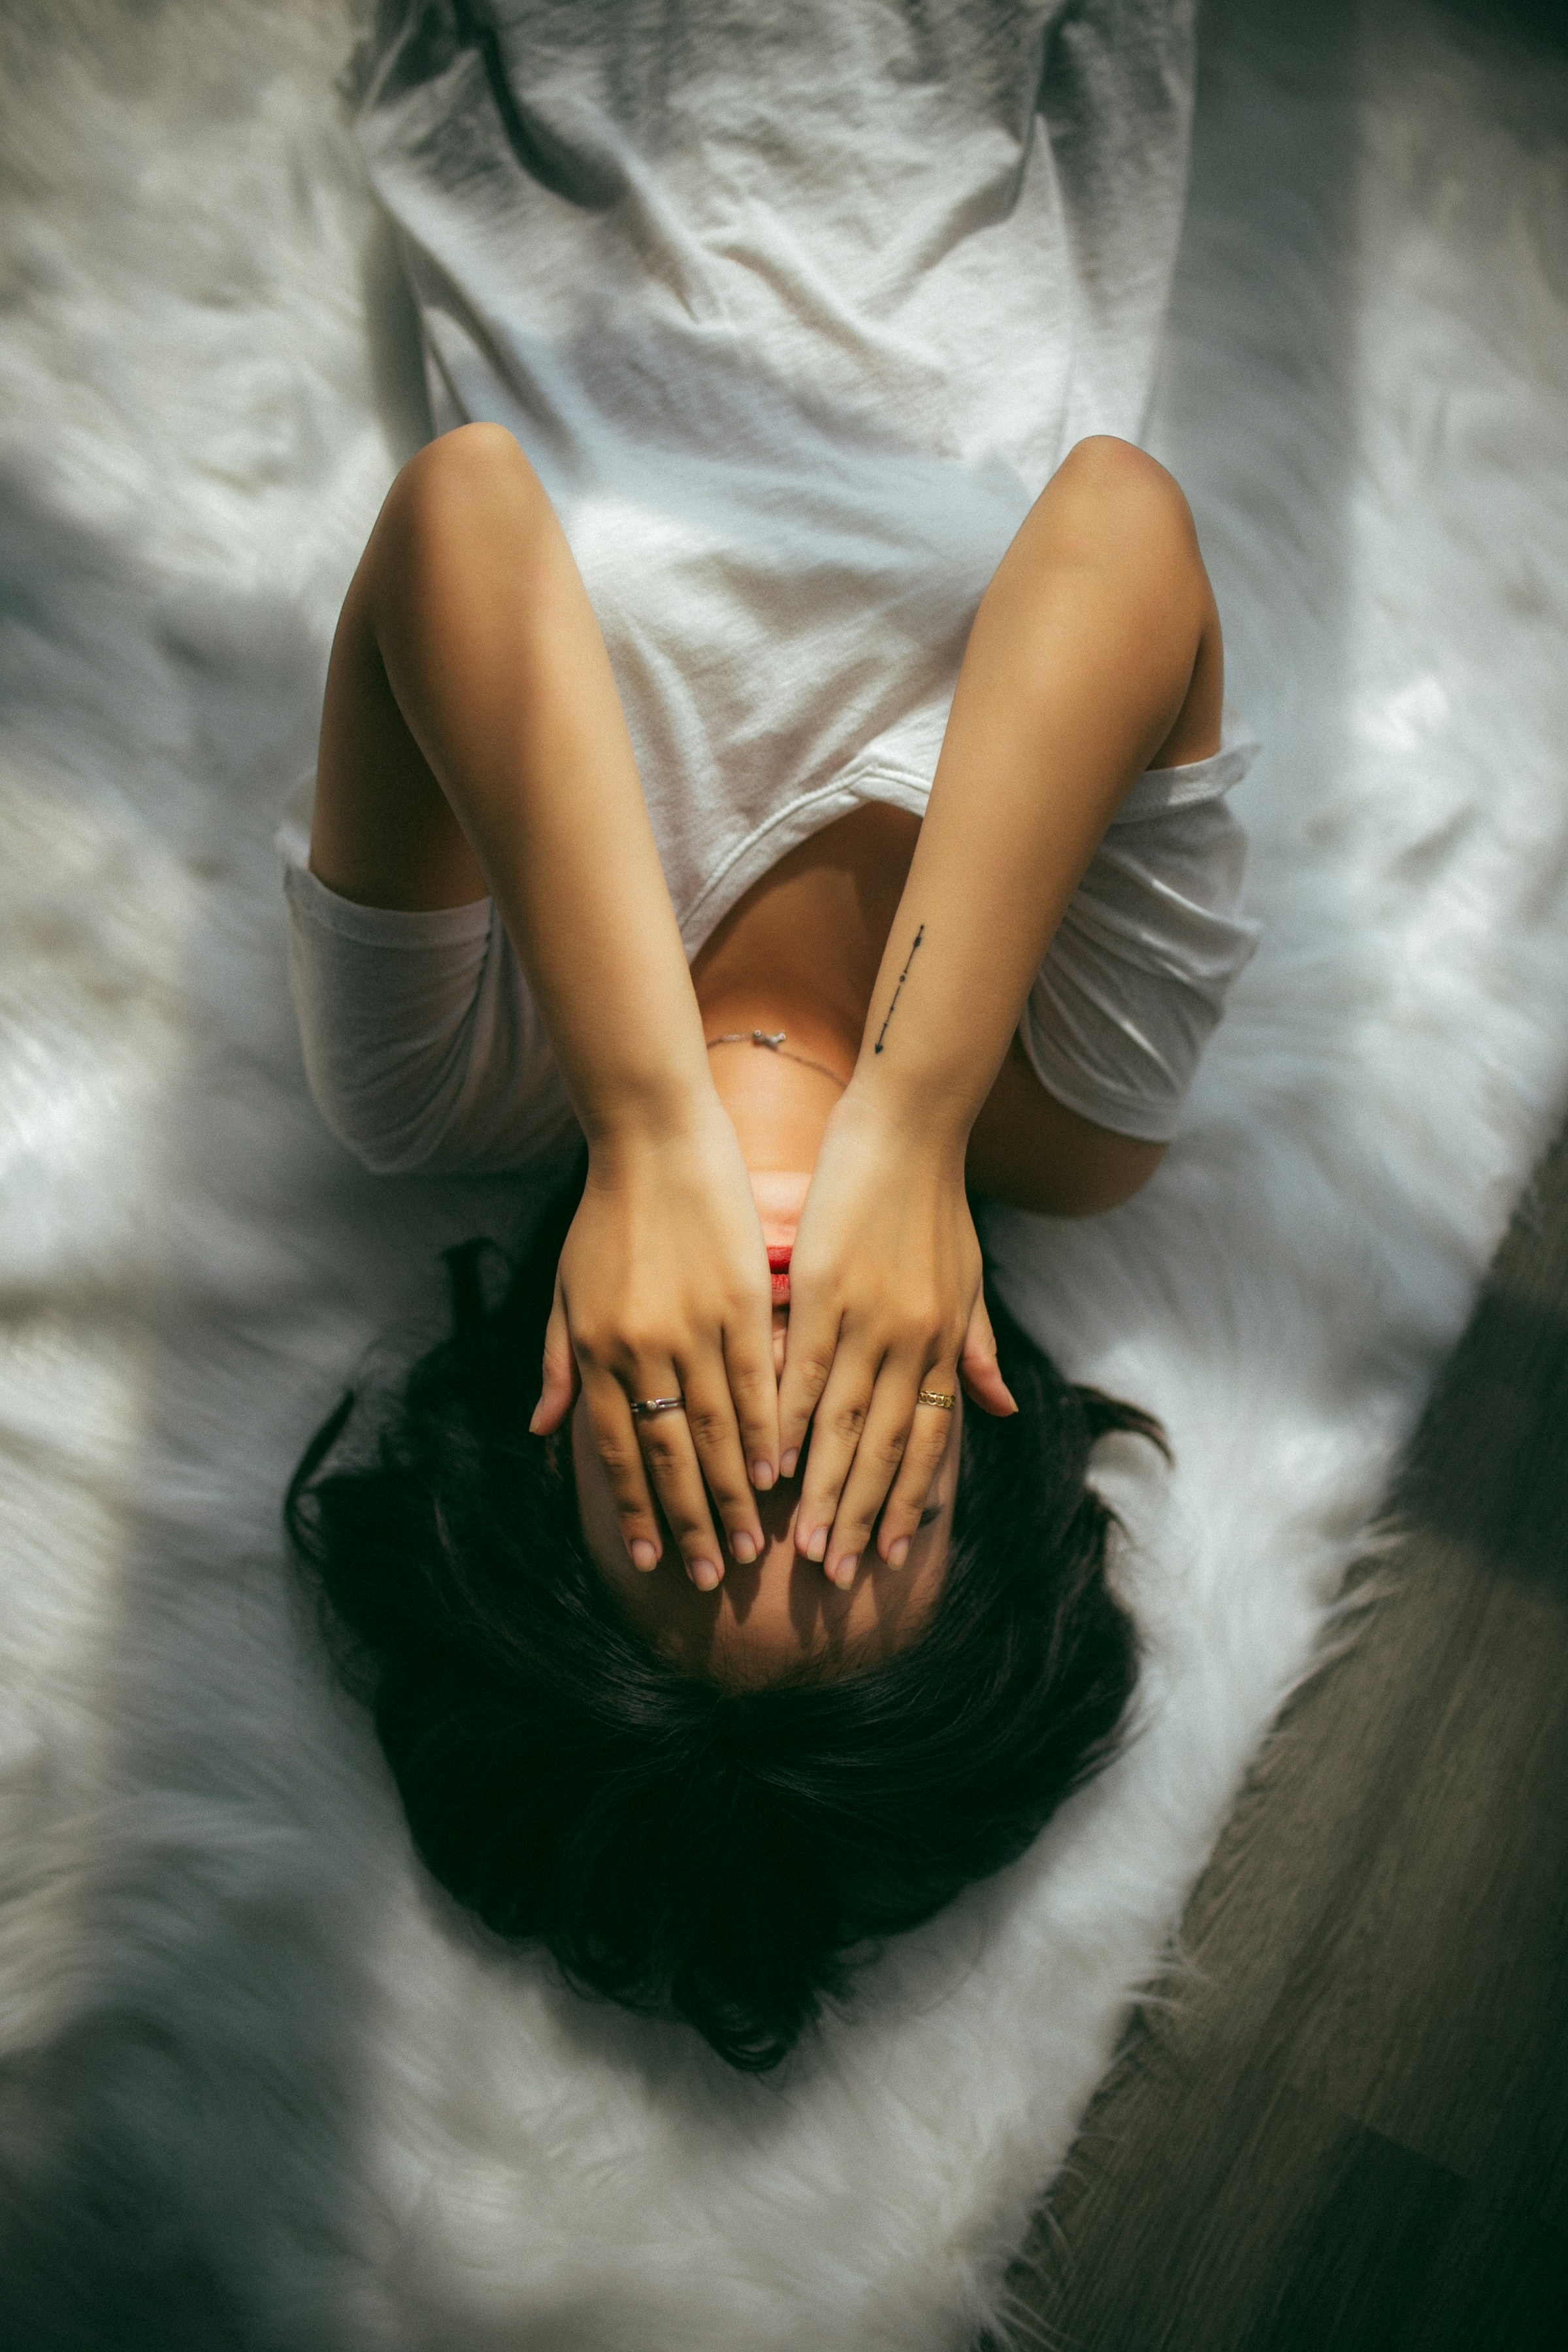 A woman lying across the bed hiding her face | Souce: Unsplash